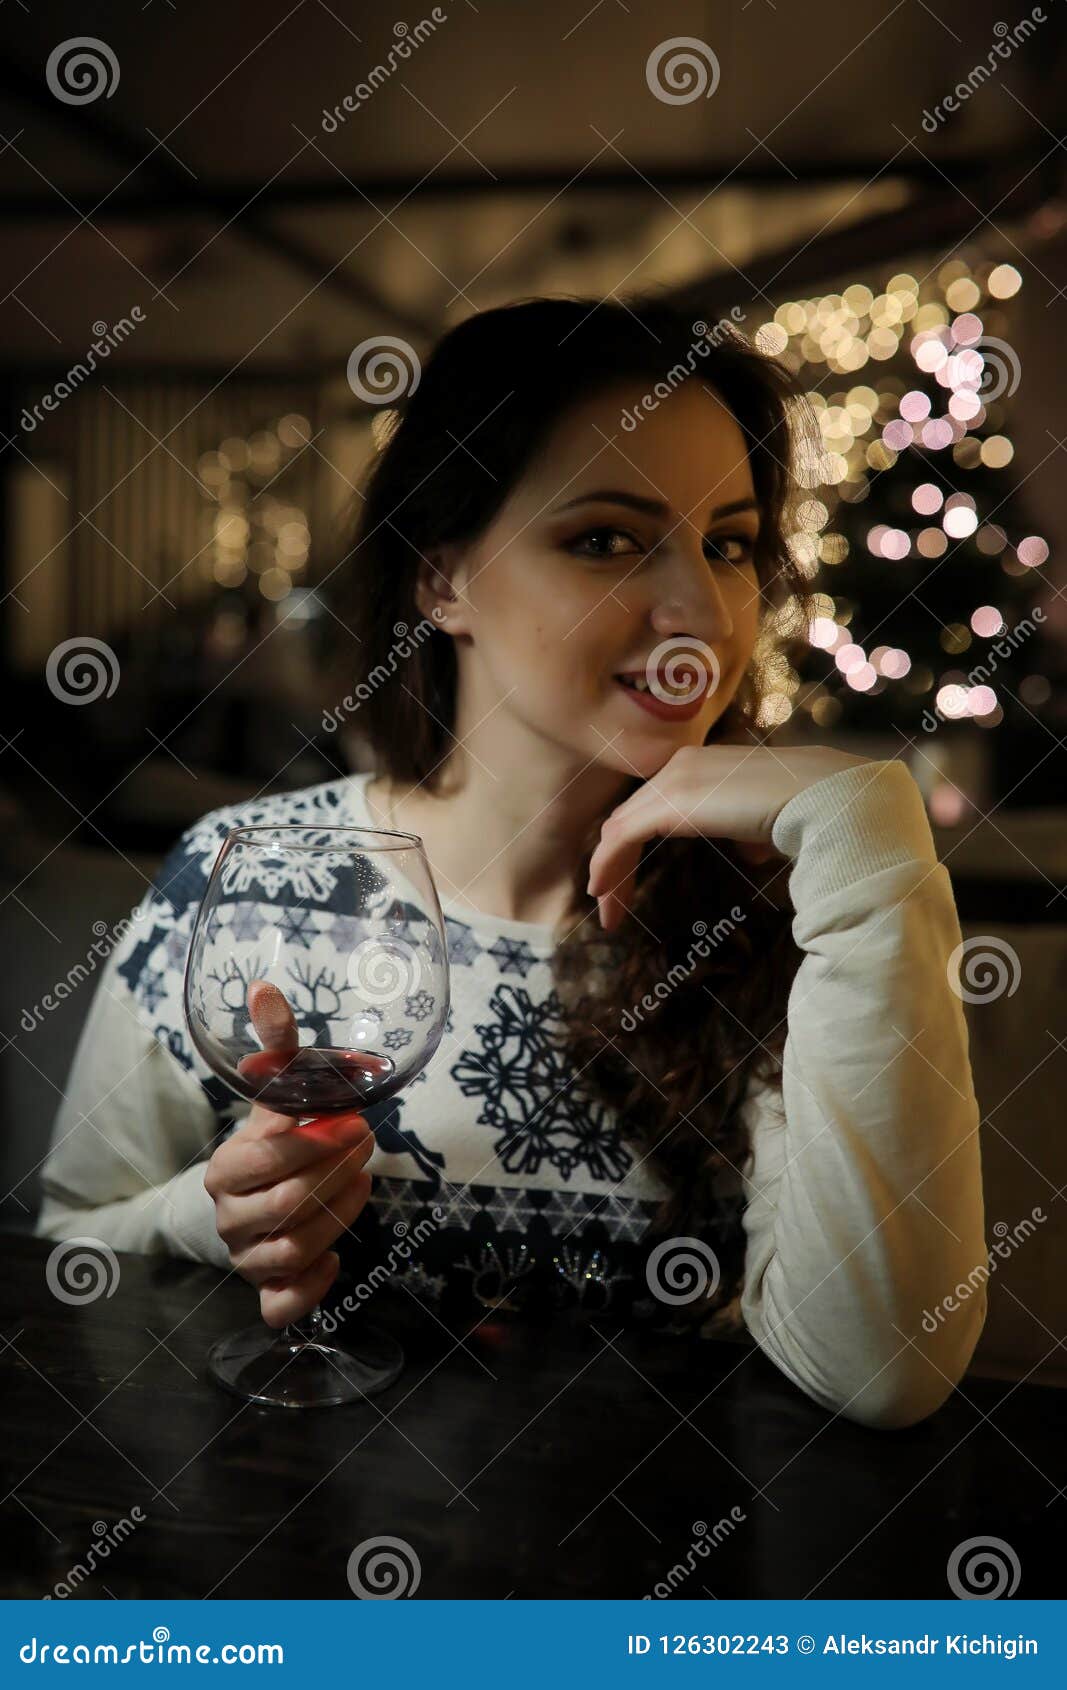 The Girl in the Evening Rest in a Cafe Stock Image - Image of dreaming ...